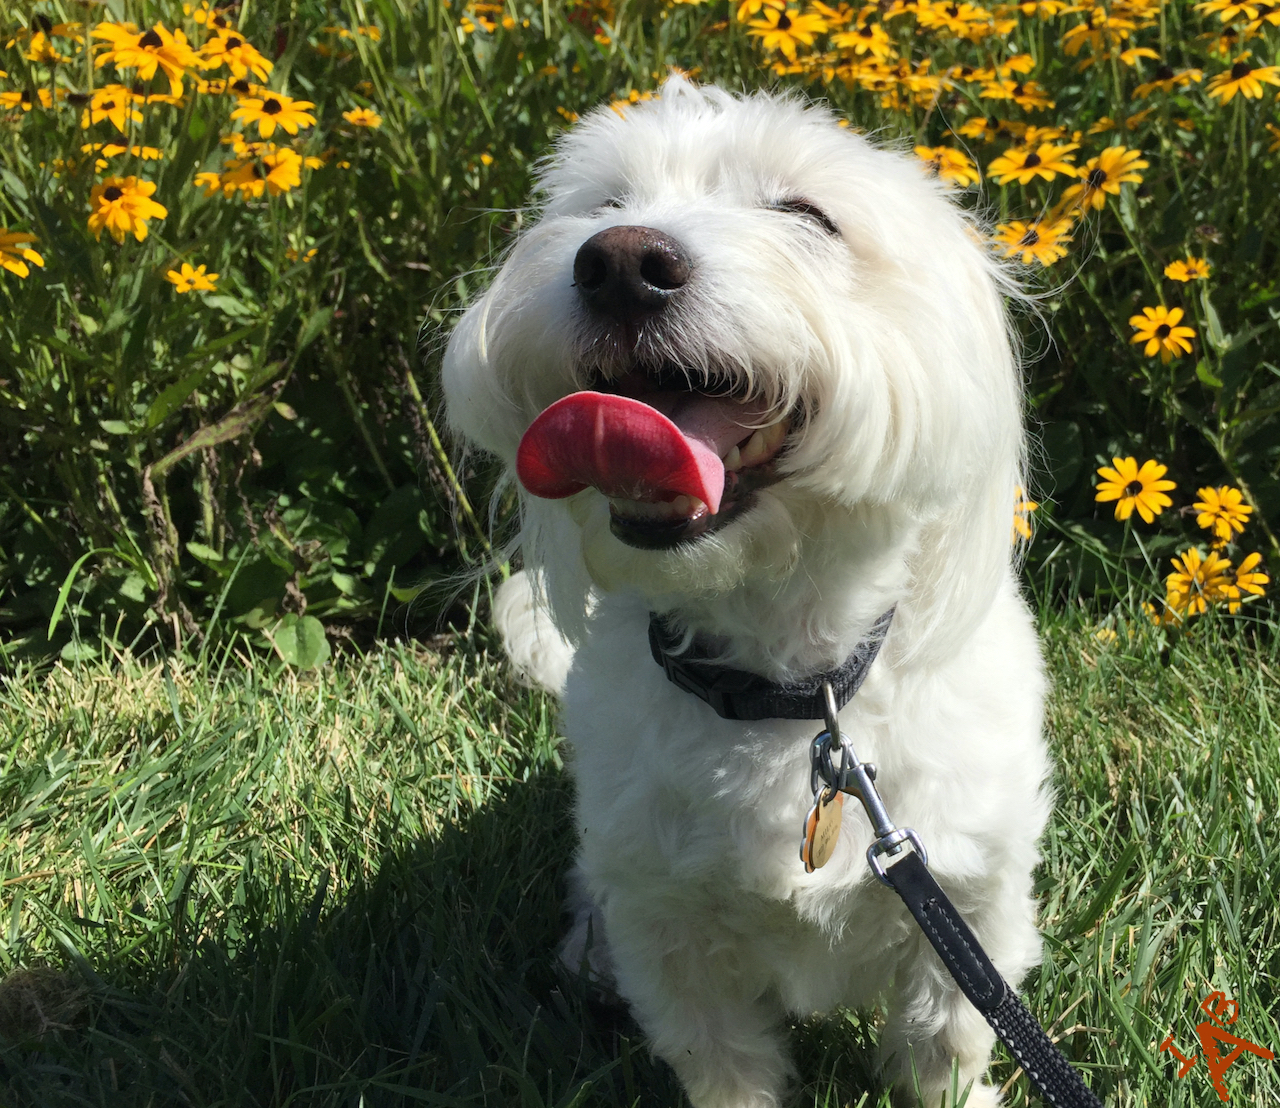 A Coton de Tulear appears to be smiling next to a field of yellow daisies.